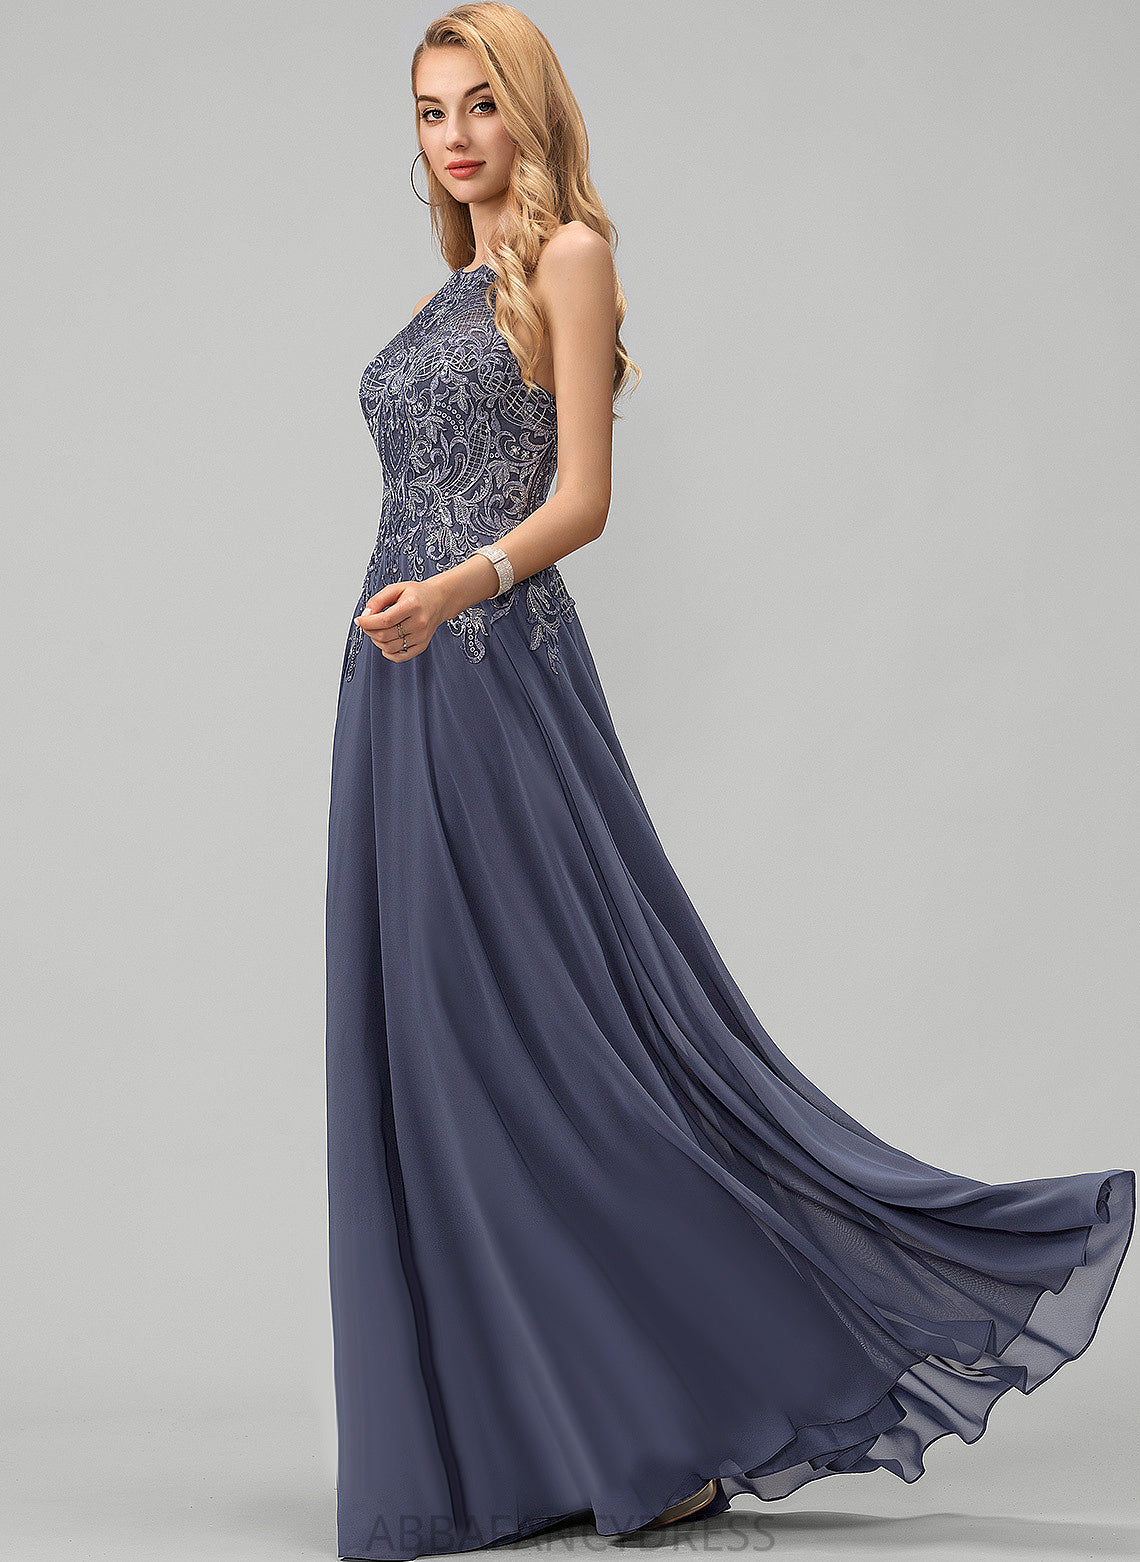 Helena Lace Scoop A-Line With Floor-Length Sequins Prom Dresses Chiffon